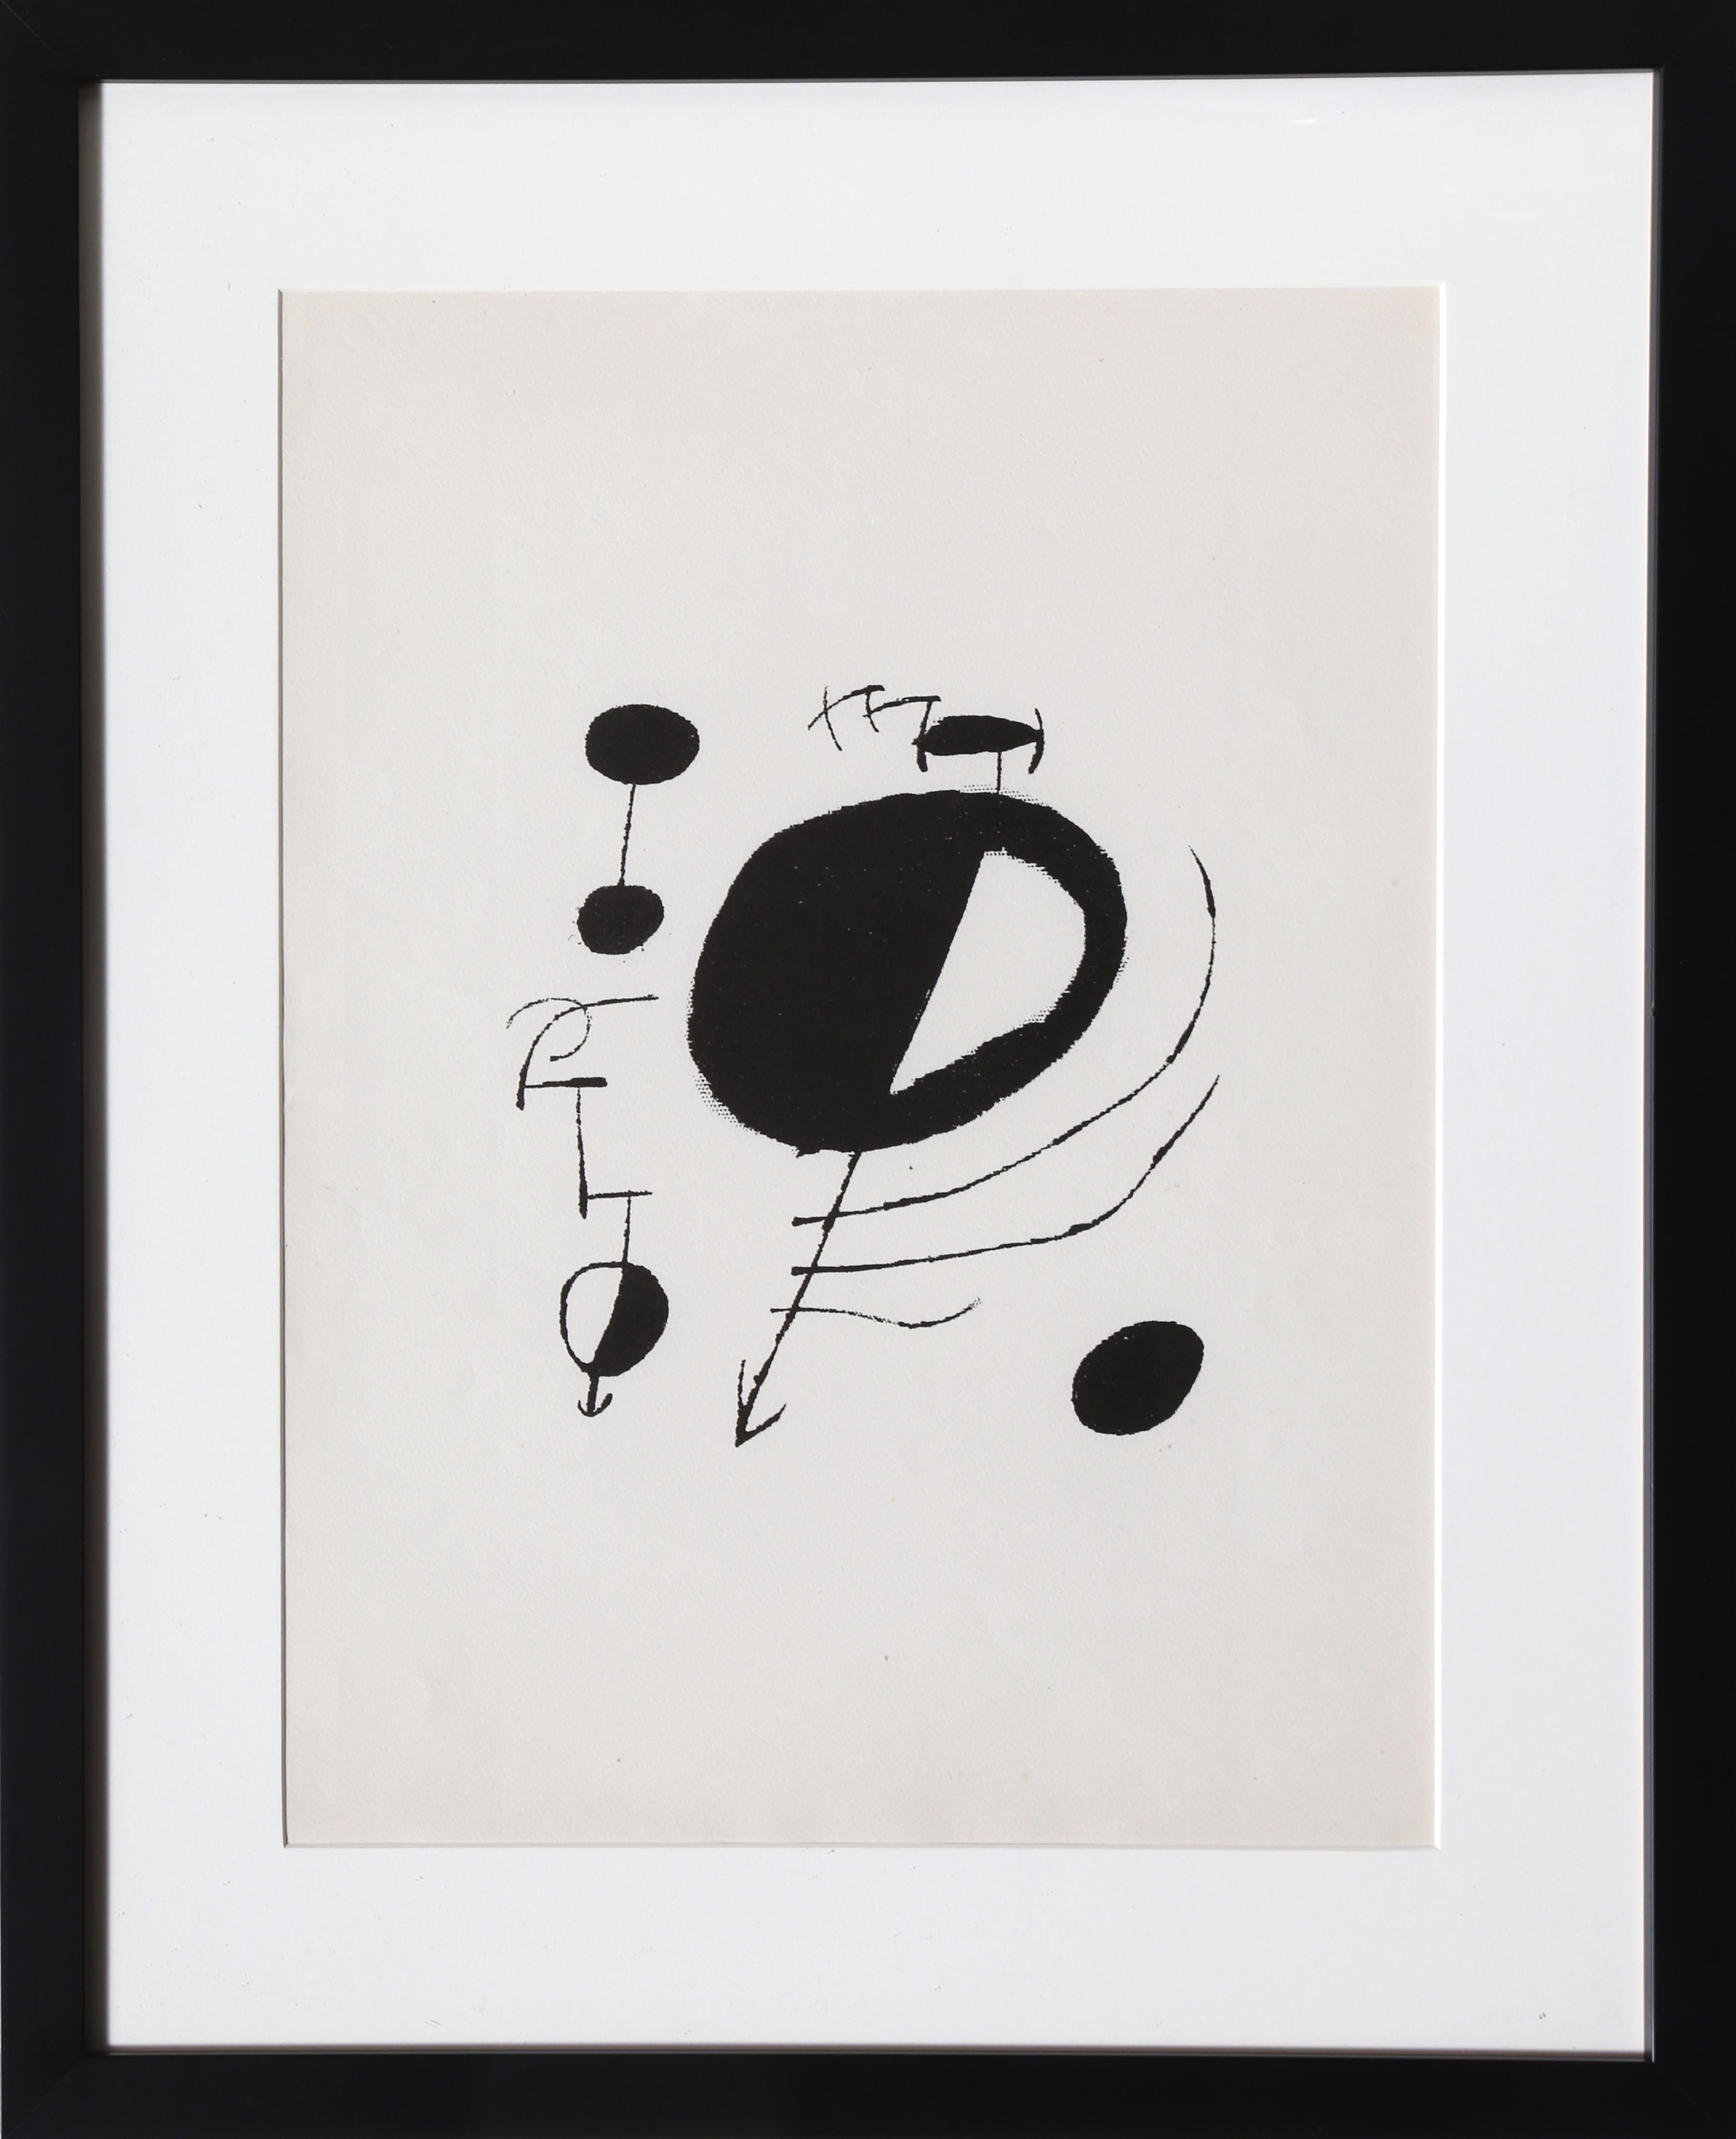 Artist: Joan Miro, Spanish (1893 - 1983)
Title: Les Essencies de la Tierra
Year: 1968
Medium: Lithograph on Guarro
Edition: LX (60)
Size: 19.25 x 15.25 in. (48.9 x 38.74 cm)
Frame Size: 27 x 23 inches

Reference: no. 123 in Cramer "The Illustrated